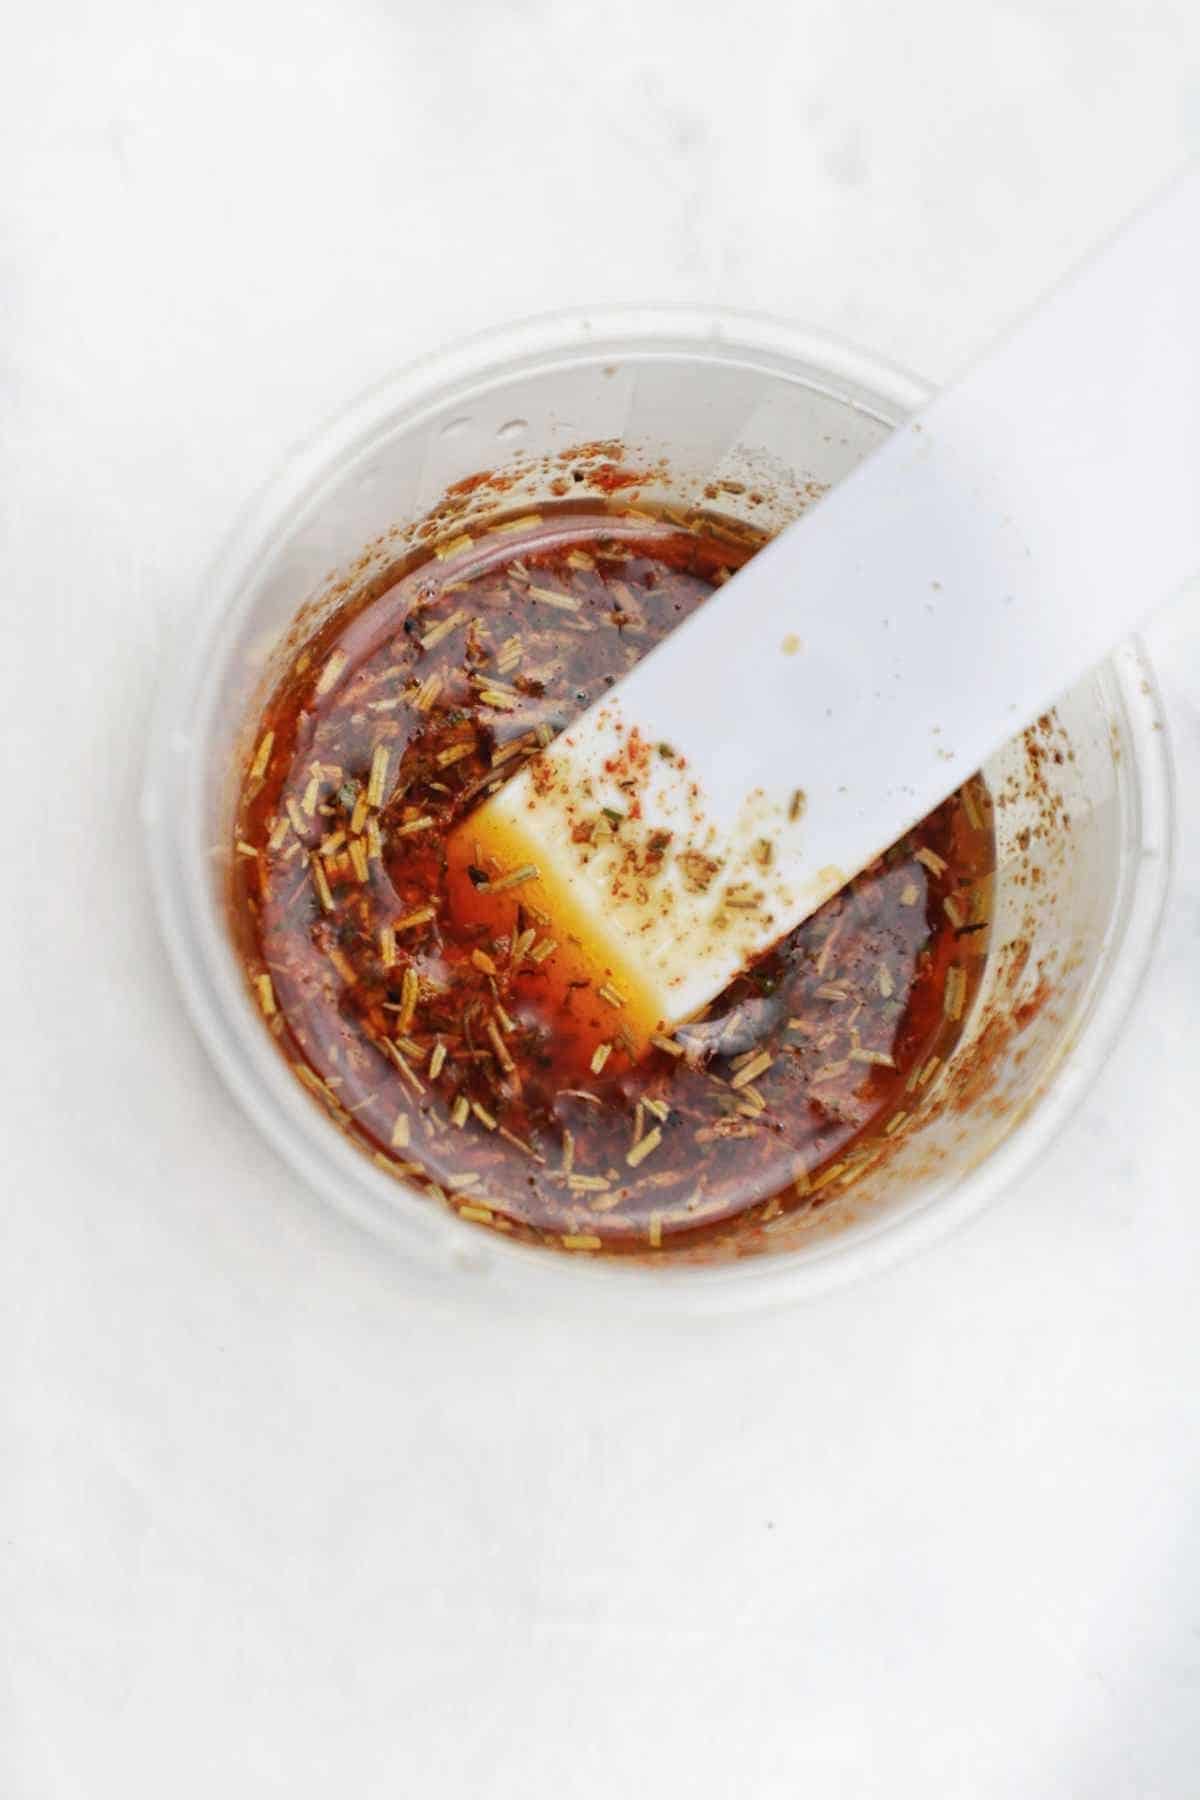 the drumstick marinade in a small bowl.